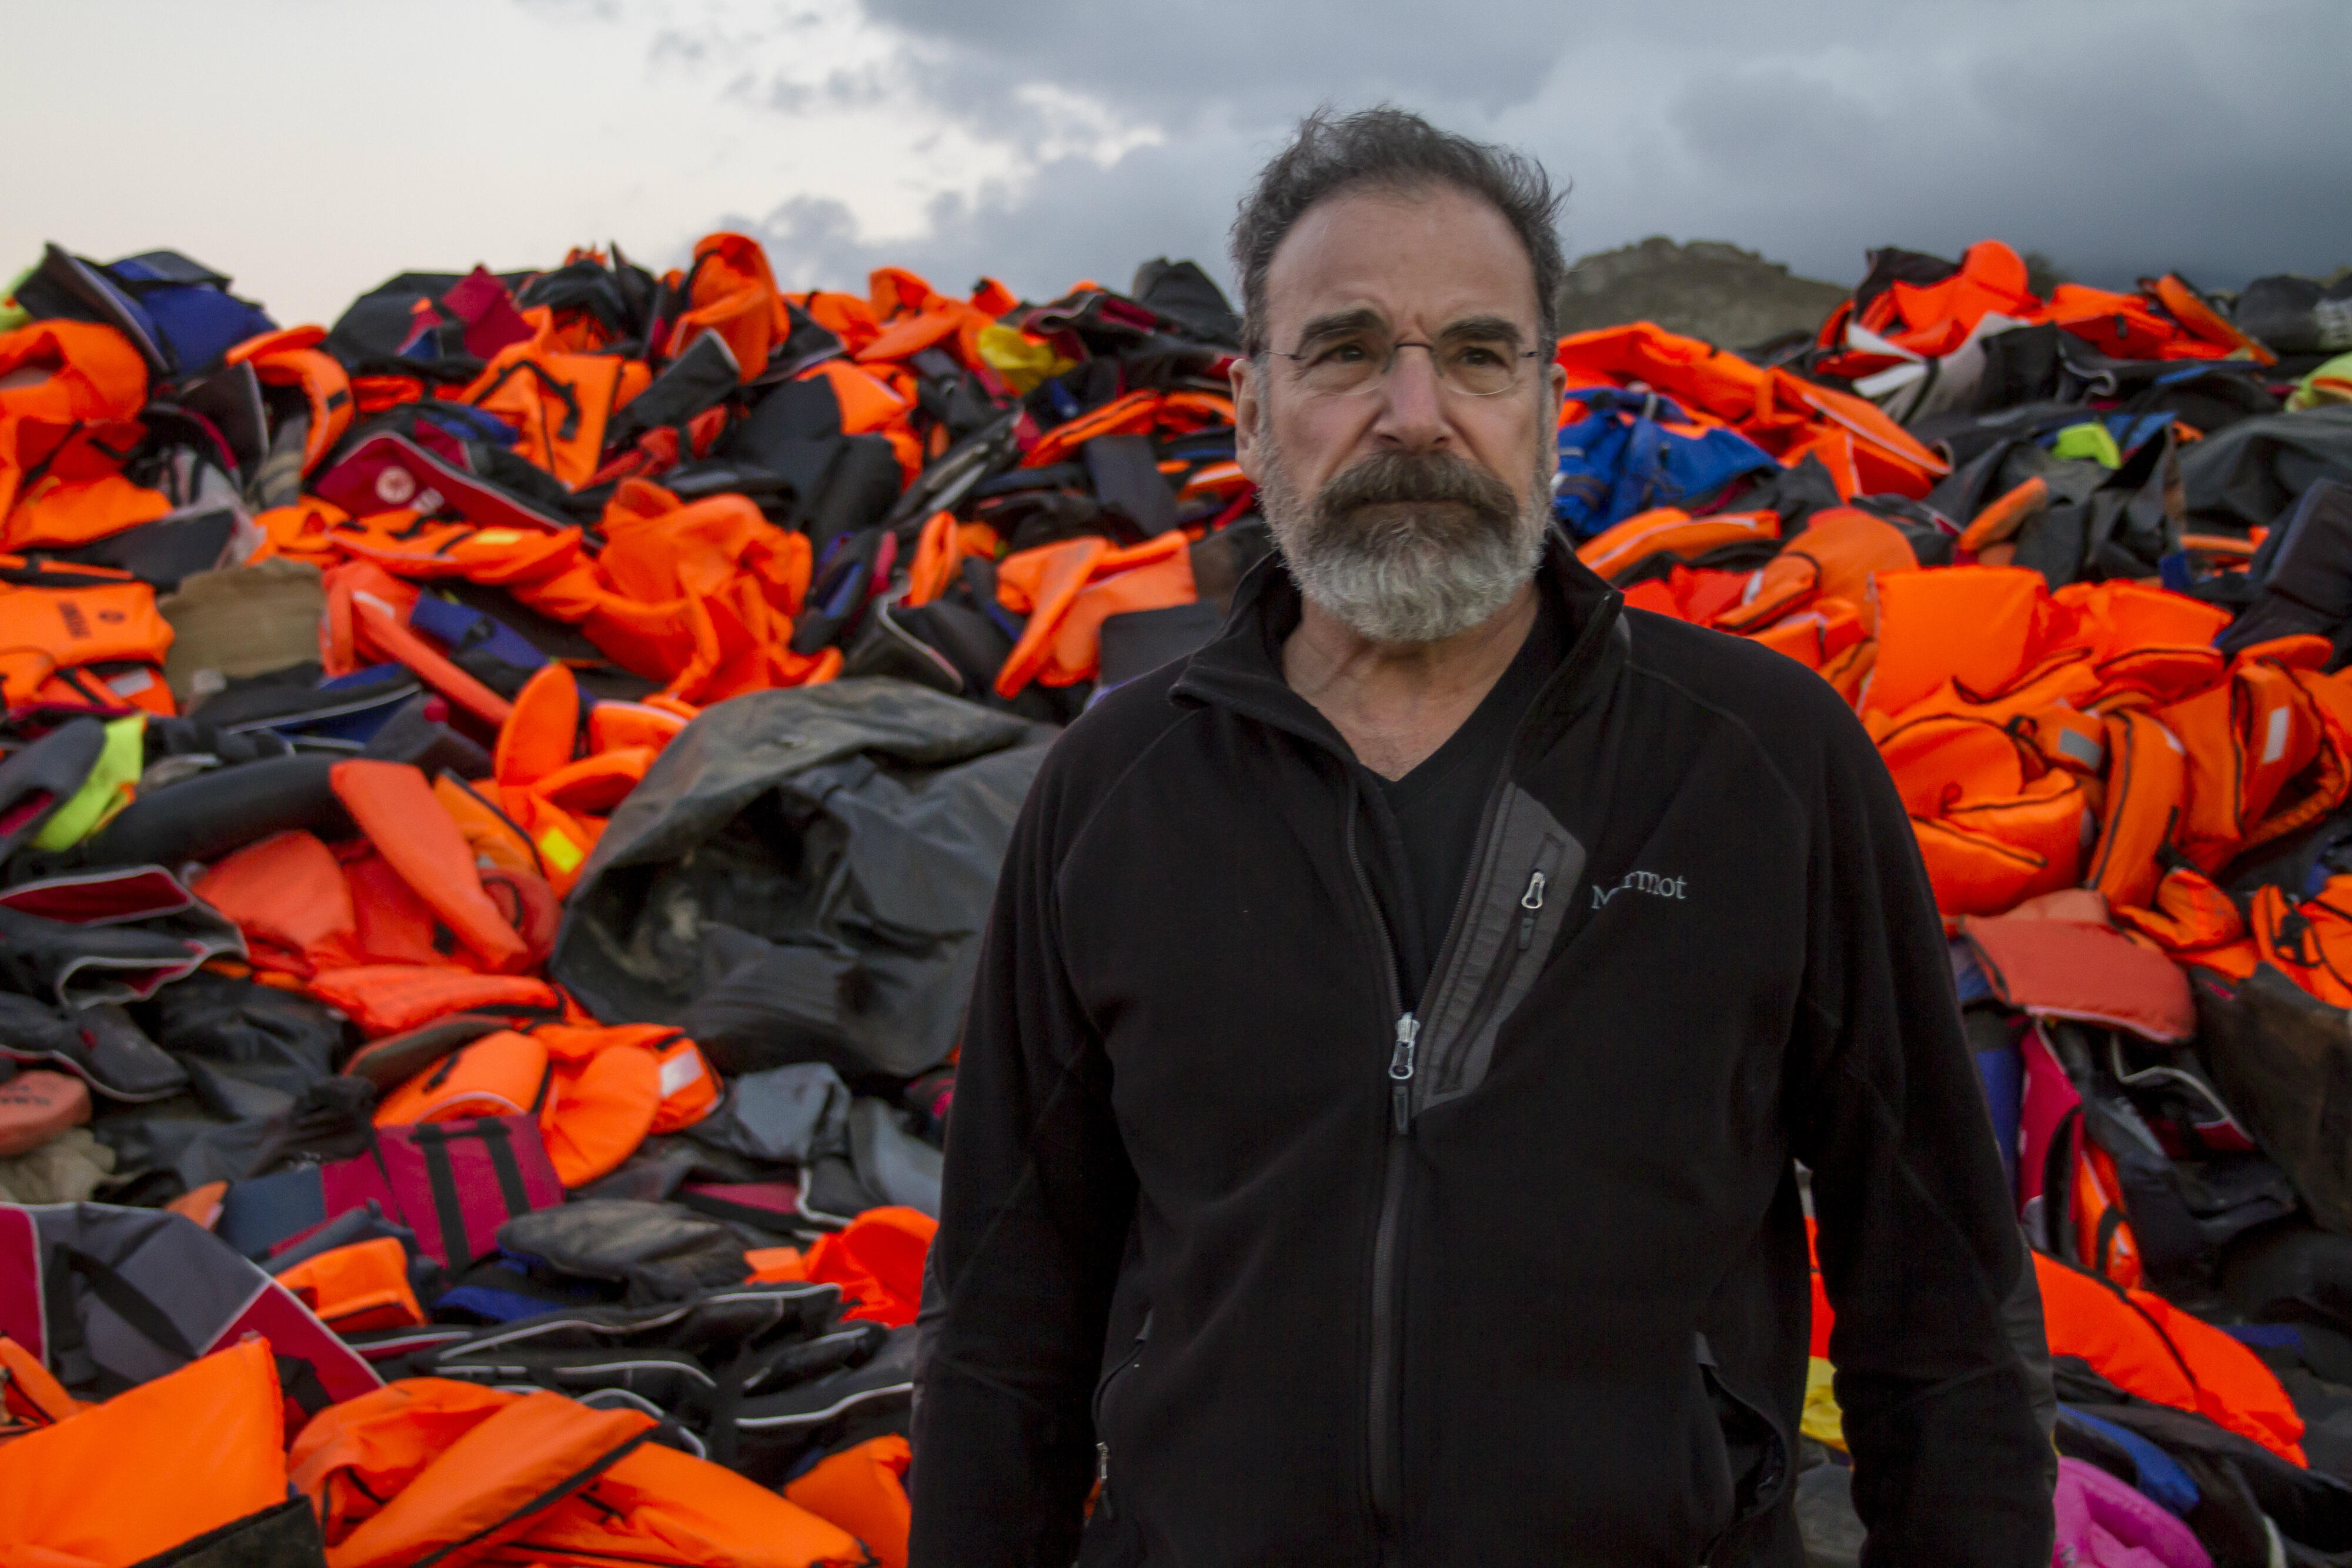 Mandy Patinkin with lifejackets used by refugees